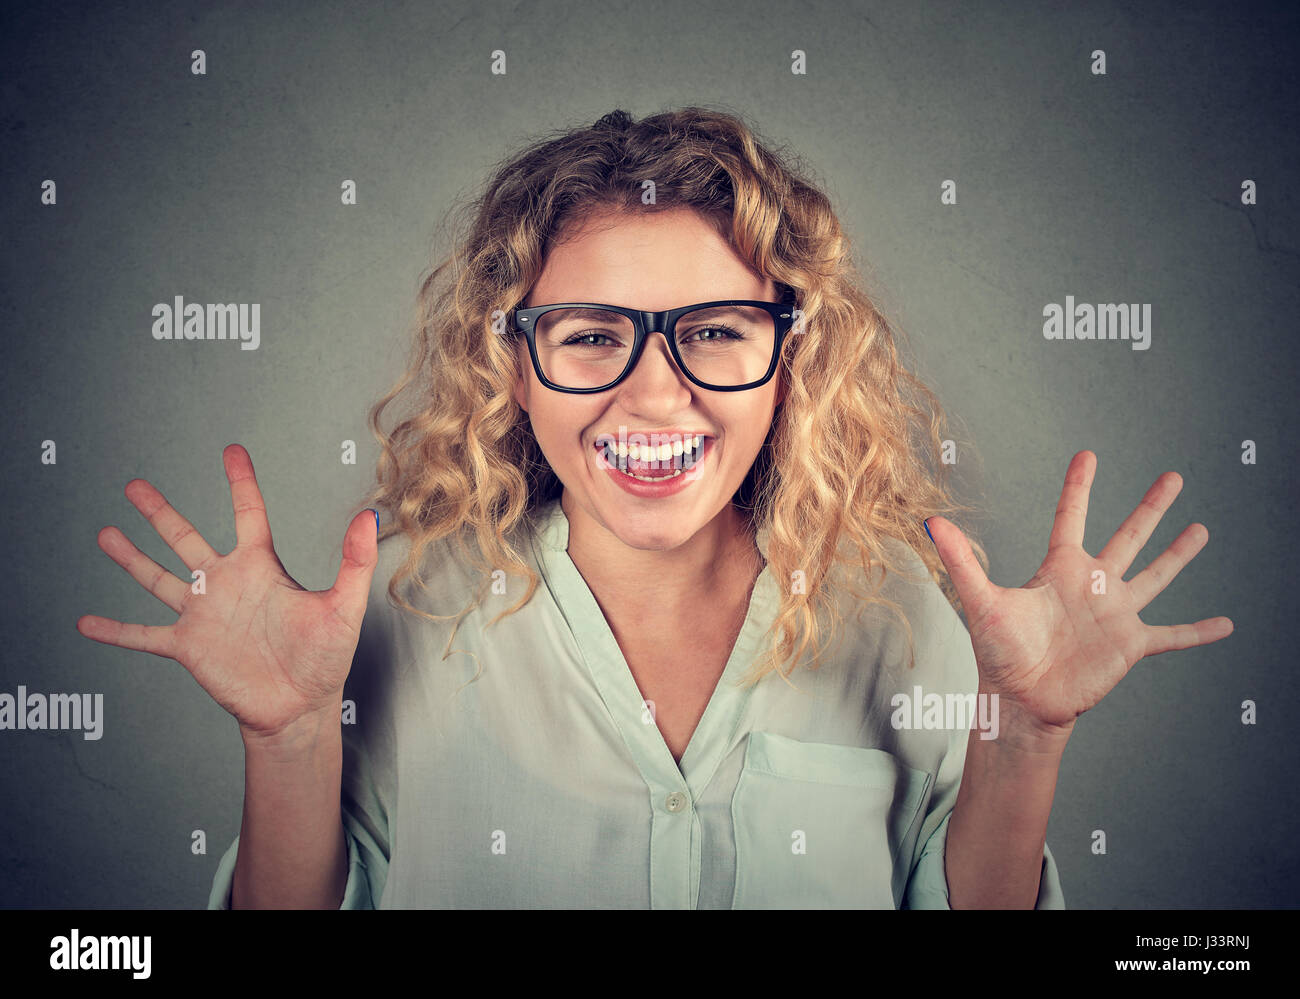 super excited funky looking girl in glasses screaming isolated on gray wall background Stock Photo